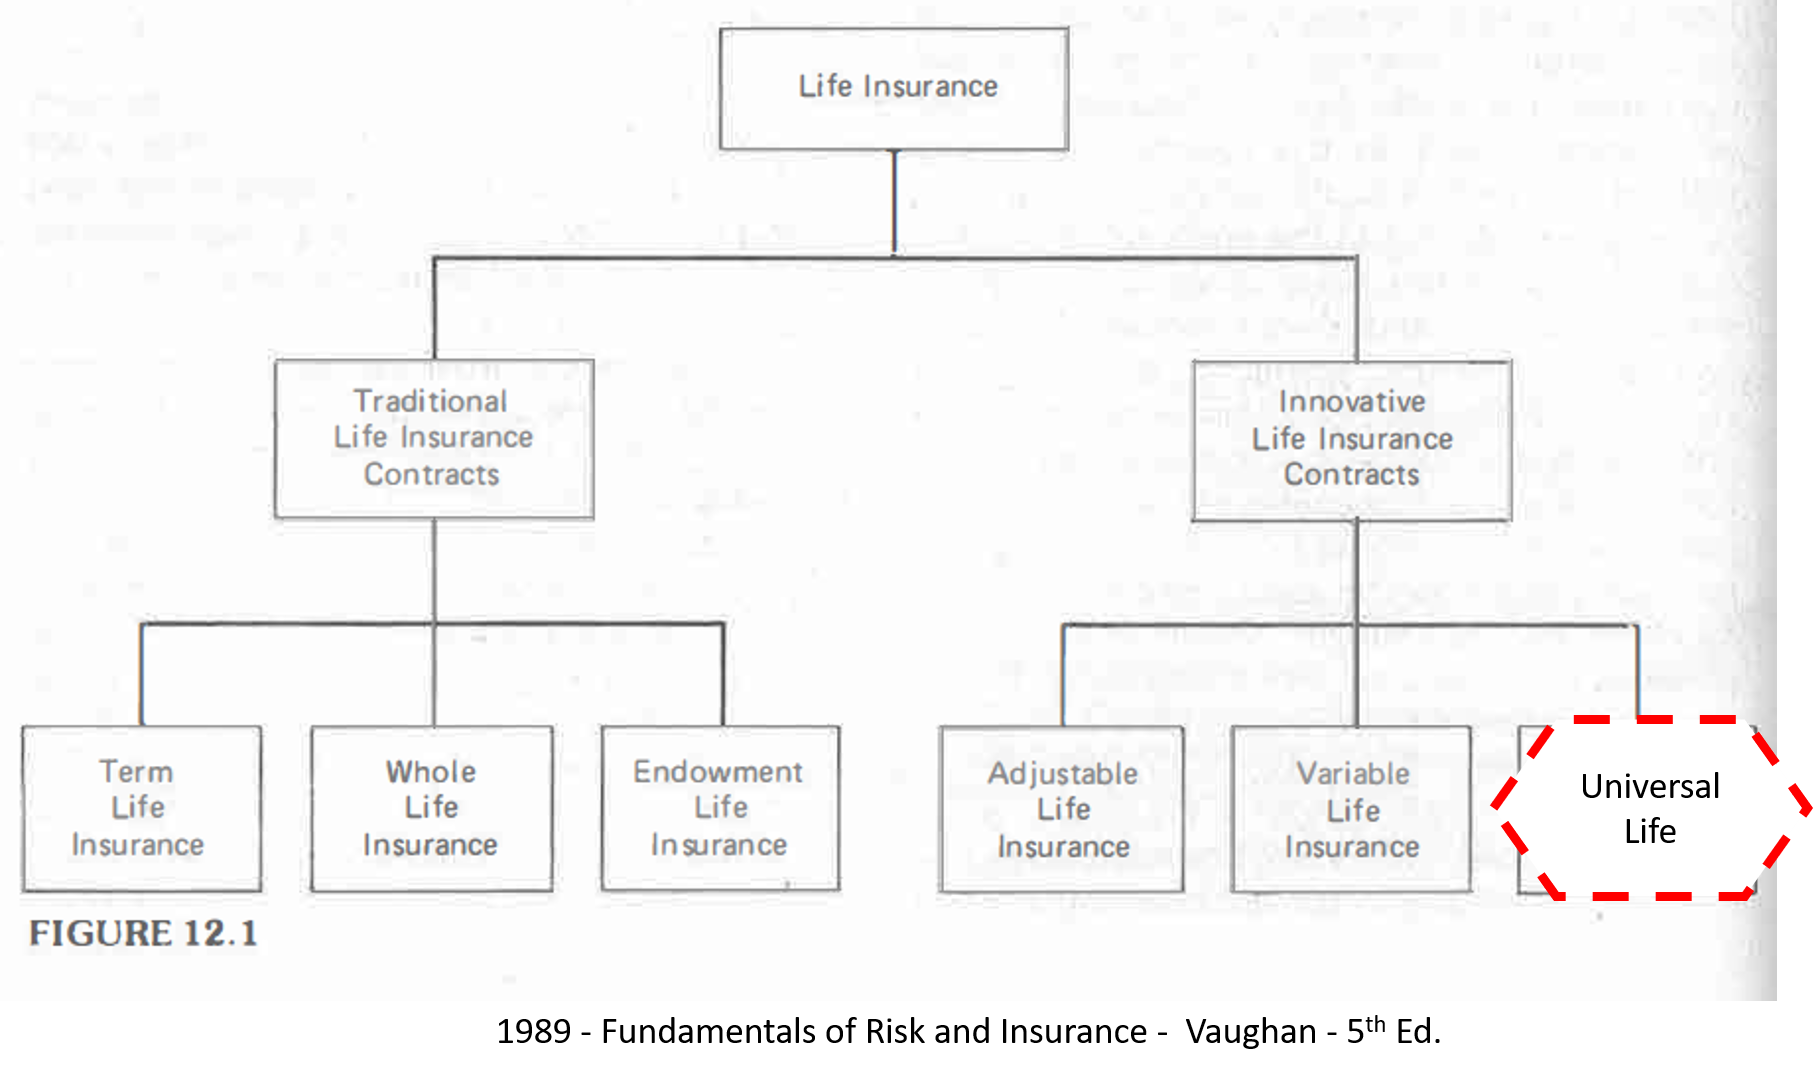 1989-Fundamentals-of-Risk-and-Ins-Vaughan-5th-Tree-Diagram - UL = INNOVATIVE